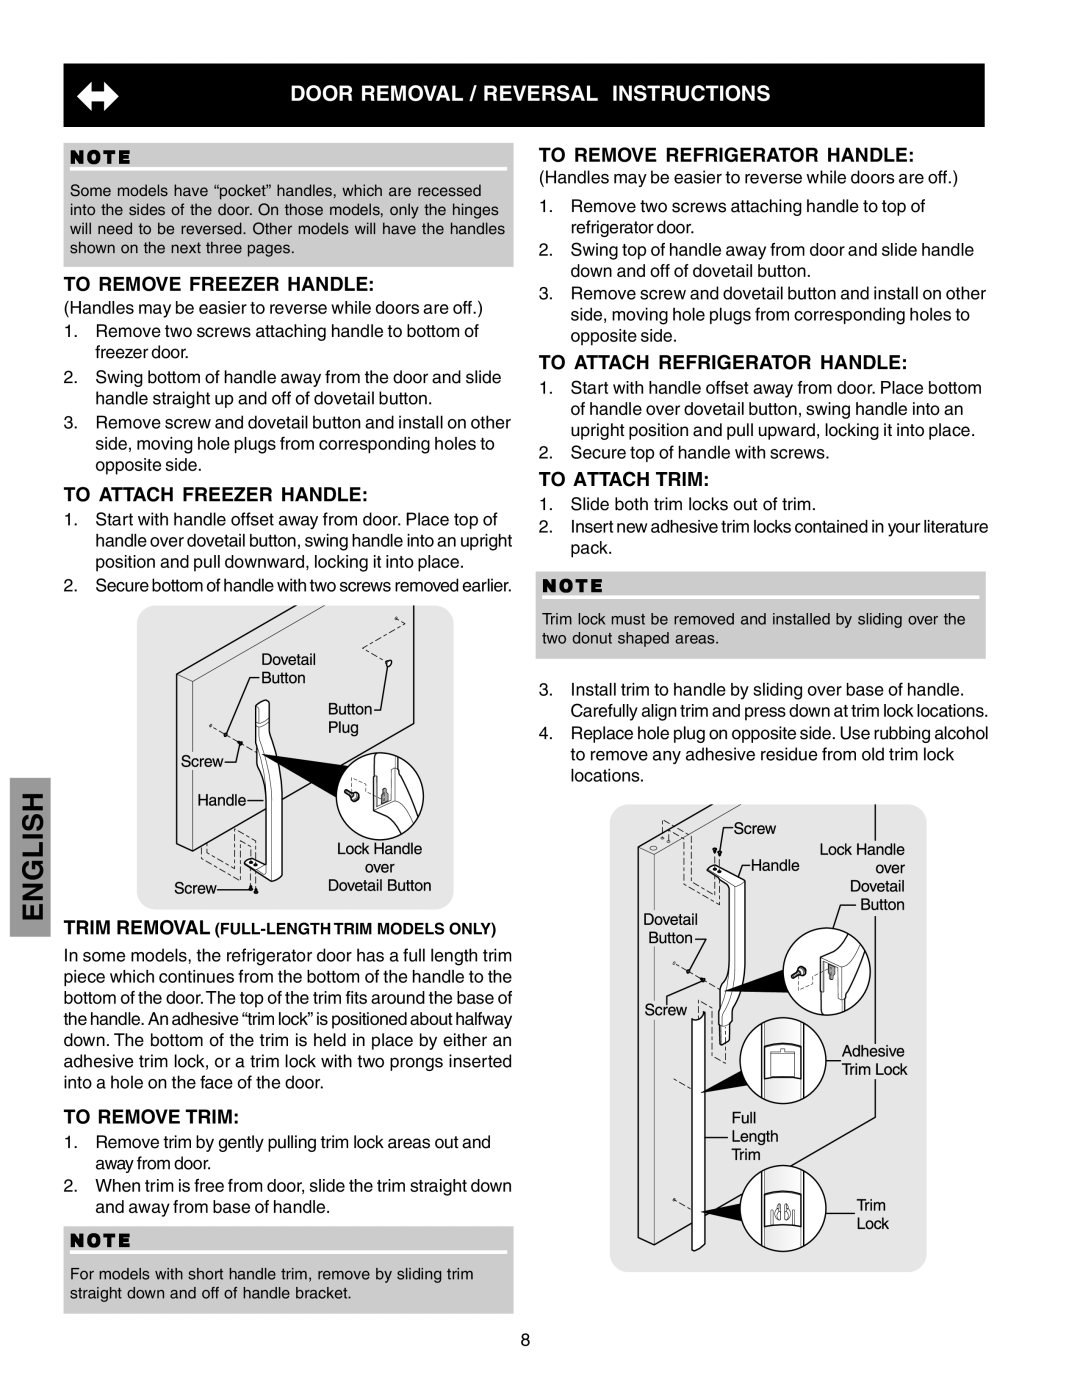 Kenmore 241815202 manual English, Door Removal / Reversal Instructions, To Remove Freezer Handle, To Attach Freezer Handle 